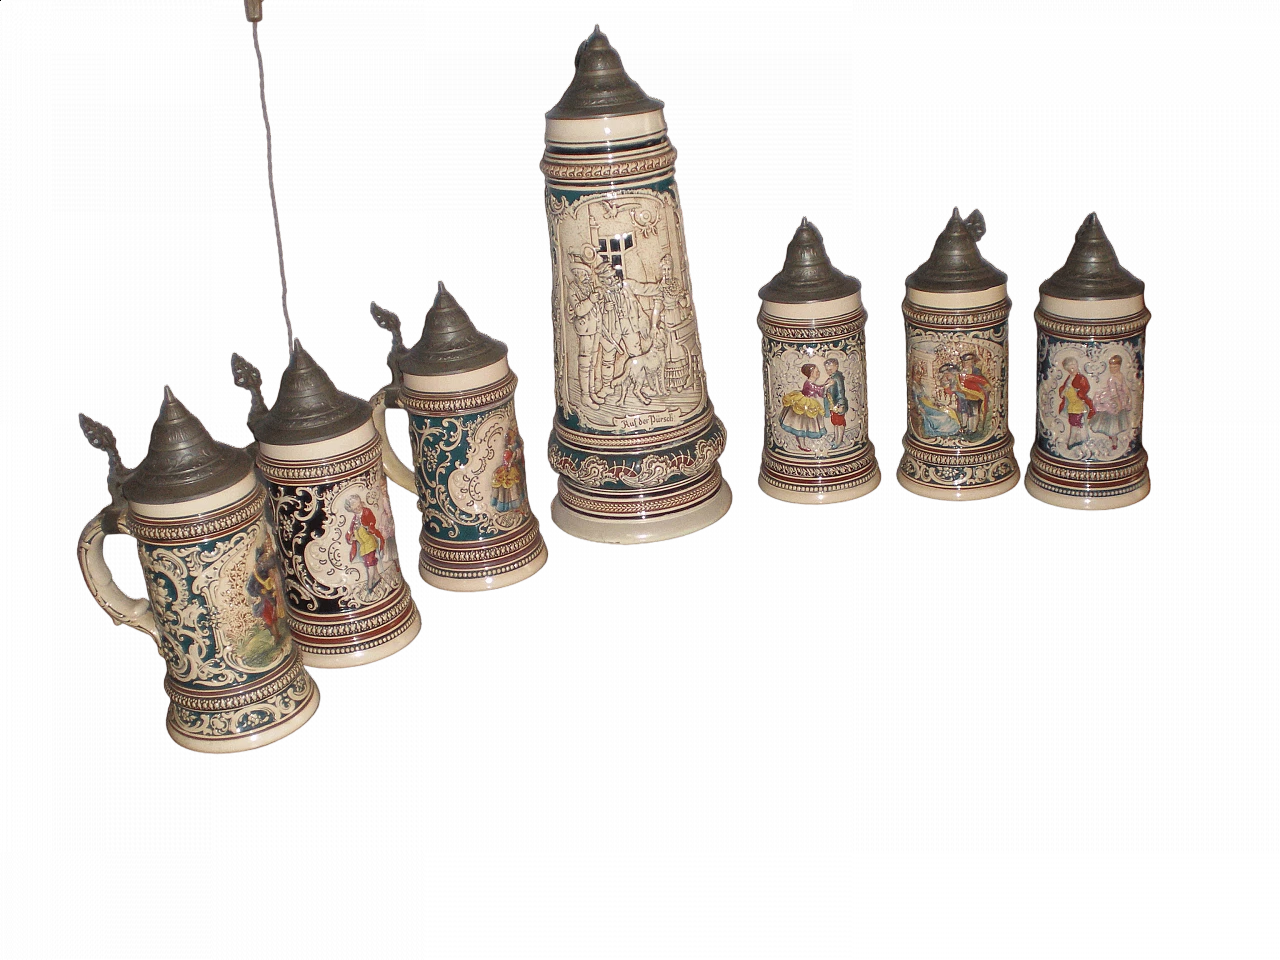 6 Ceramic beer mugs and pitcher, 19th century 11